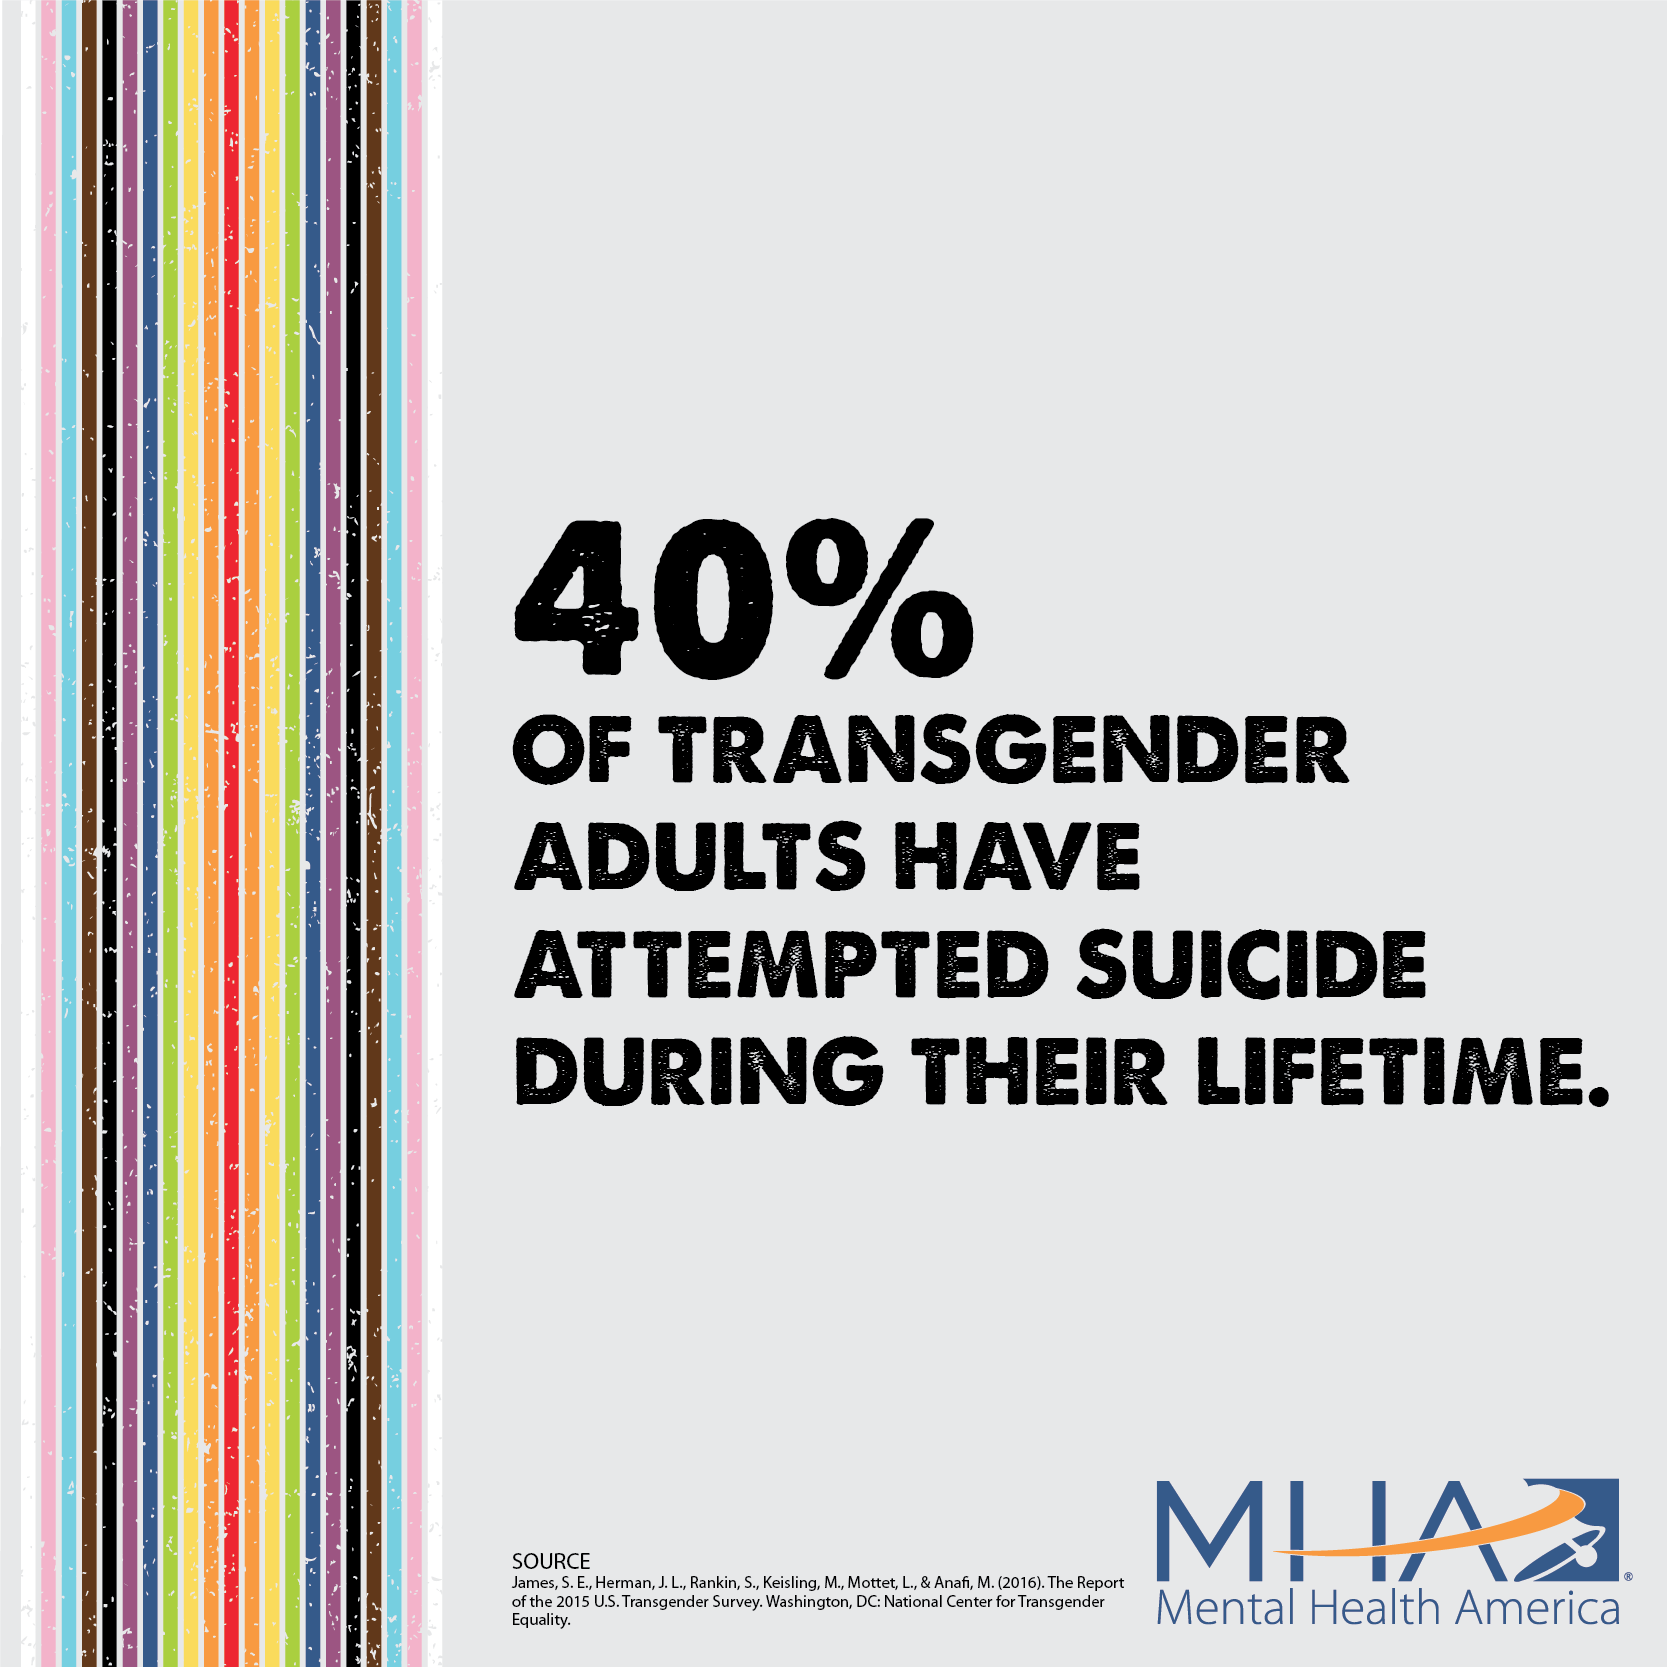 40% of transgender adults have attempted suicide during their lifetime.